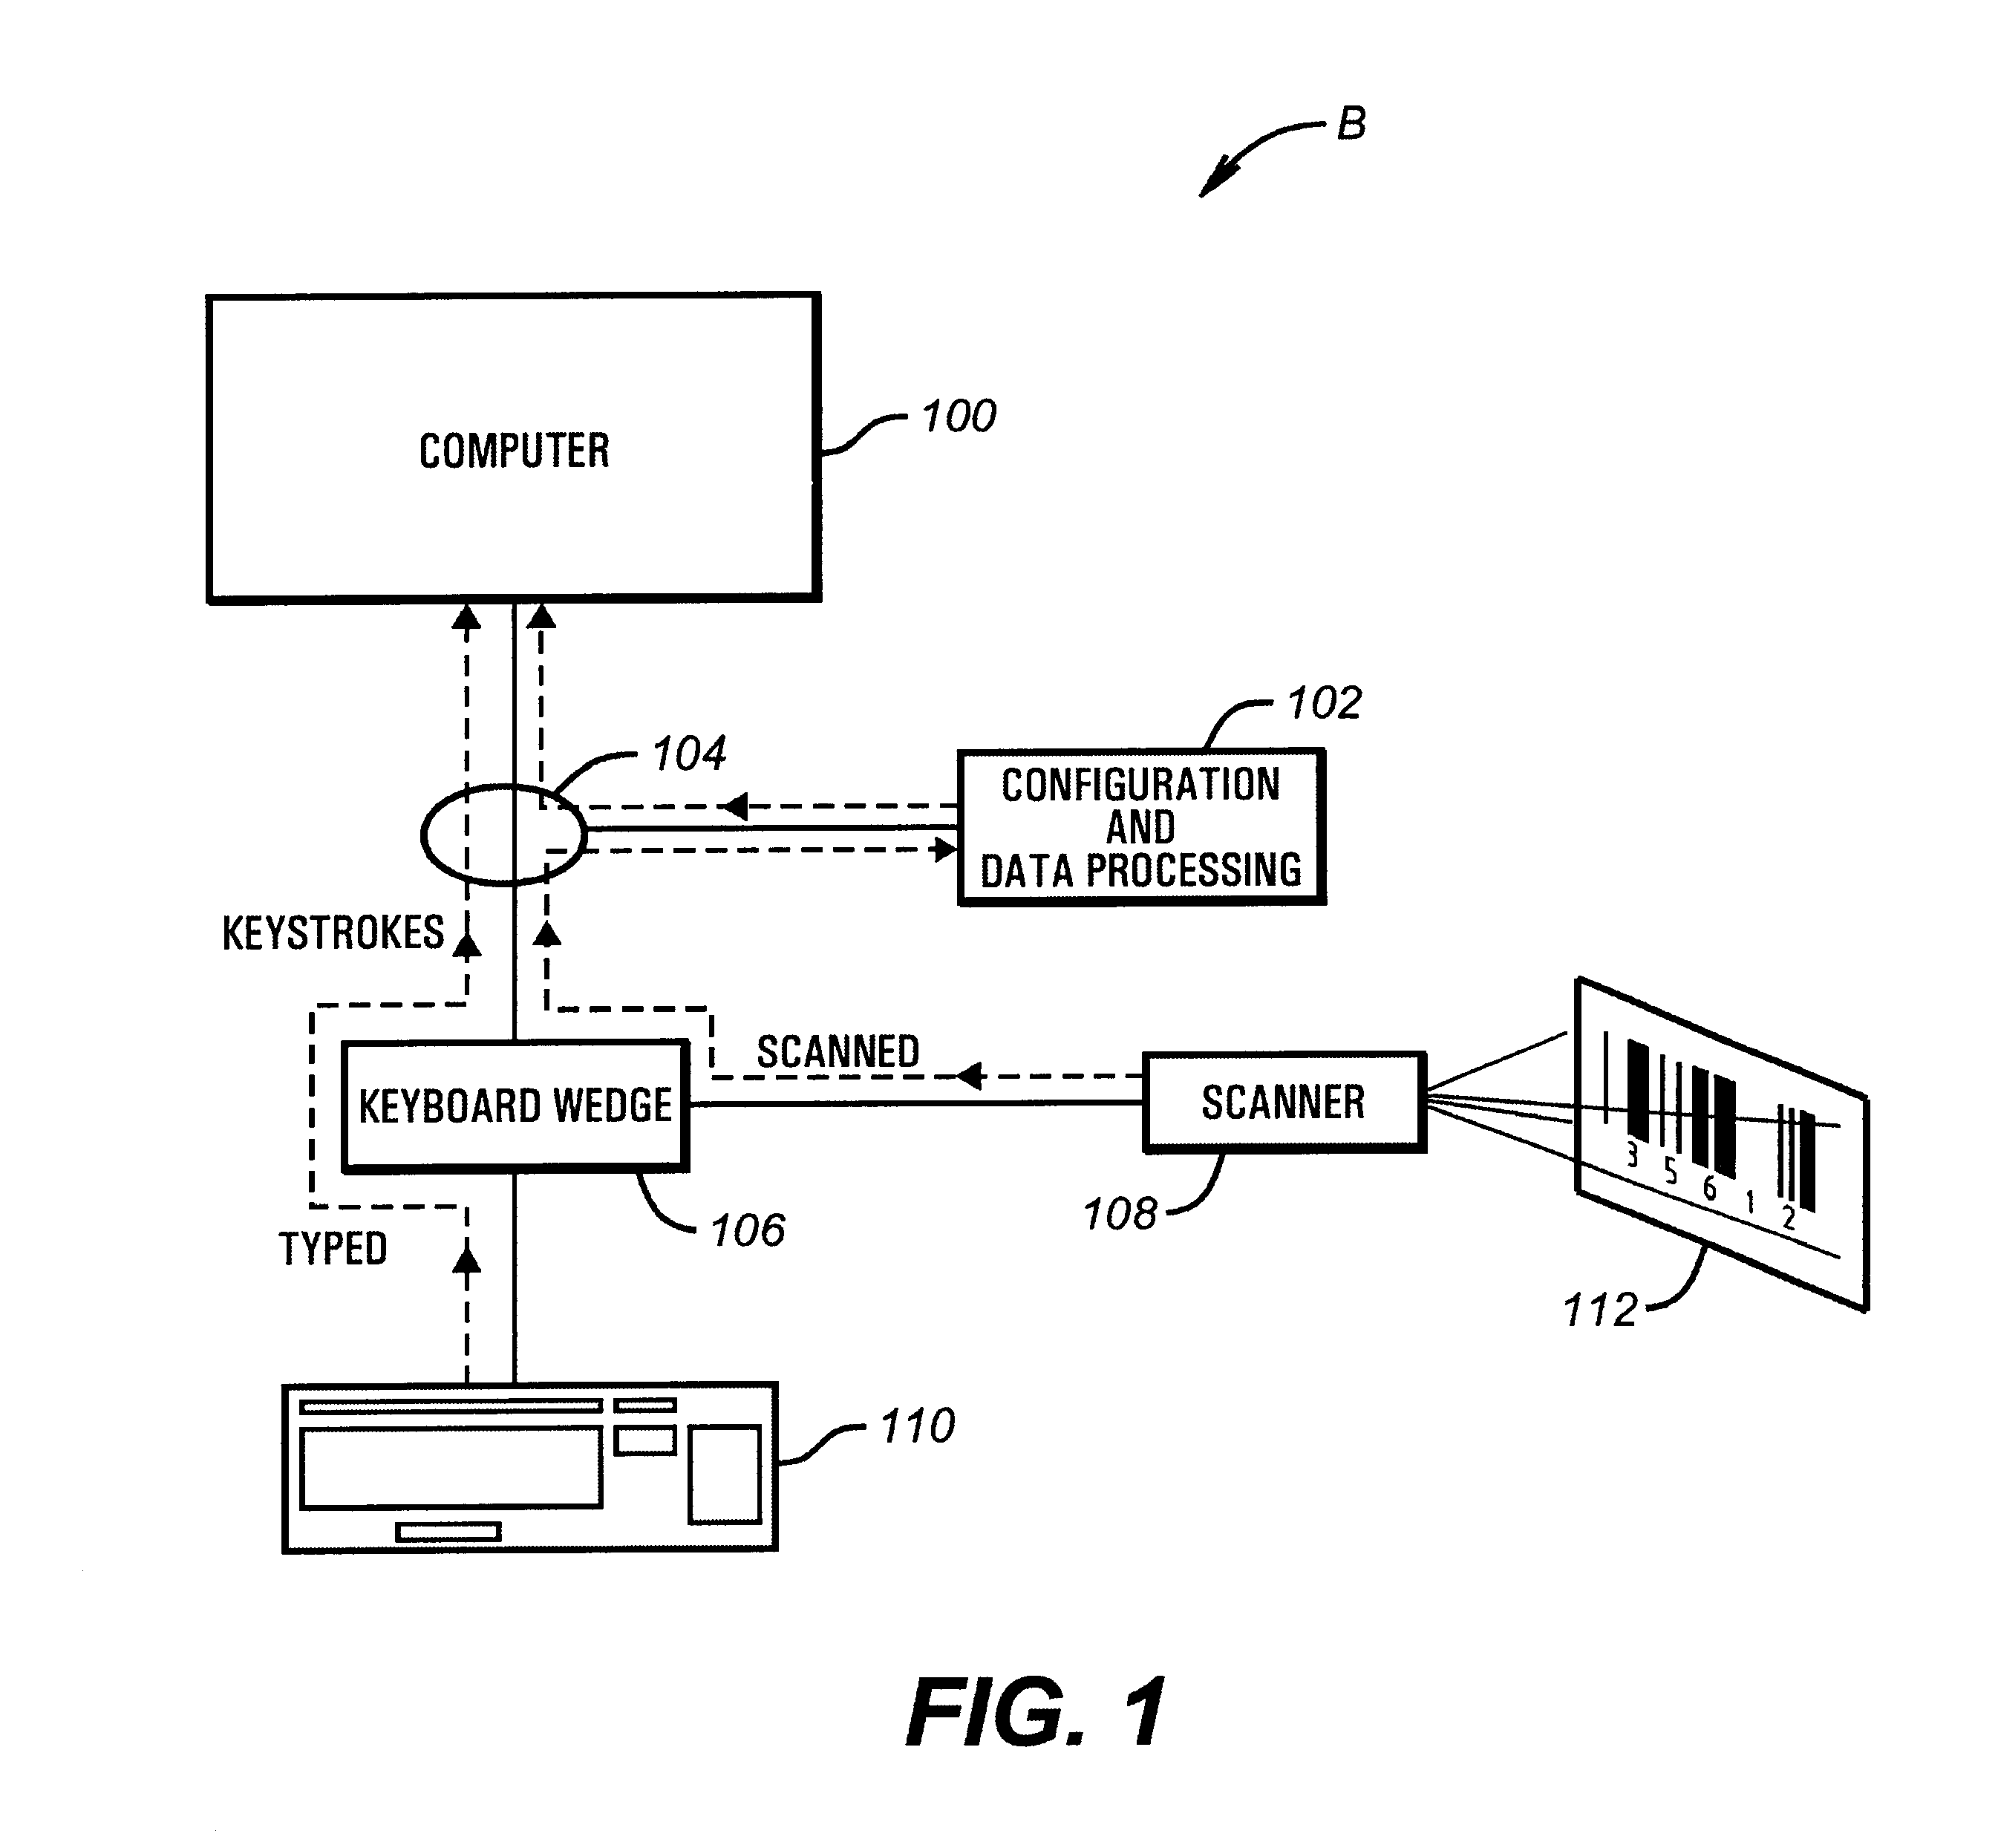 Keyboard wedge system configured for data processing over a keyboard hook